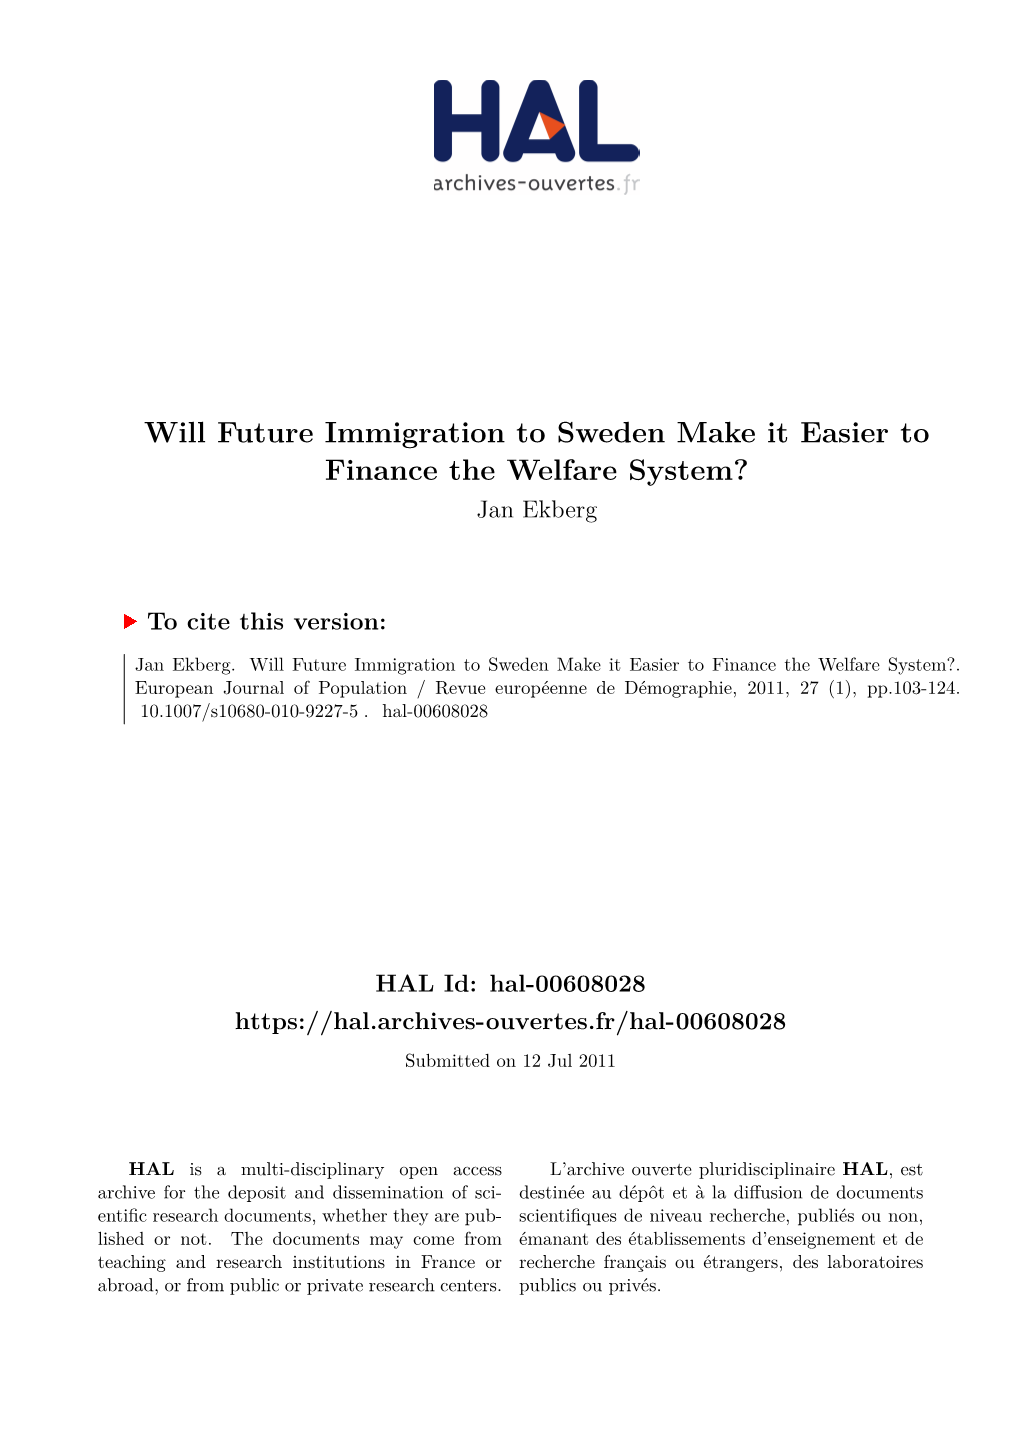 Will Future Immigration to Sweden Make It Easier to Finance the Welfare System? Jan Ekberg